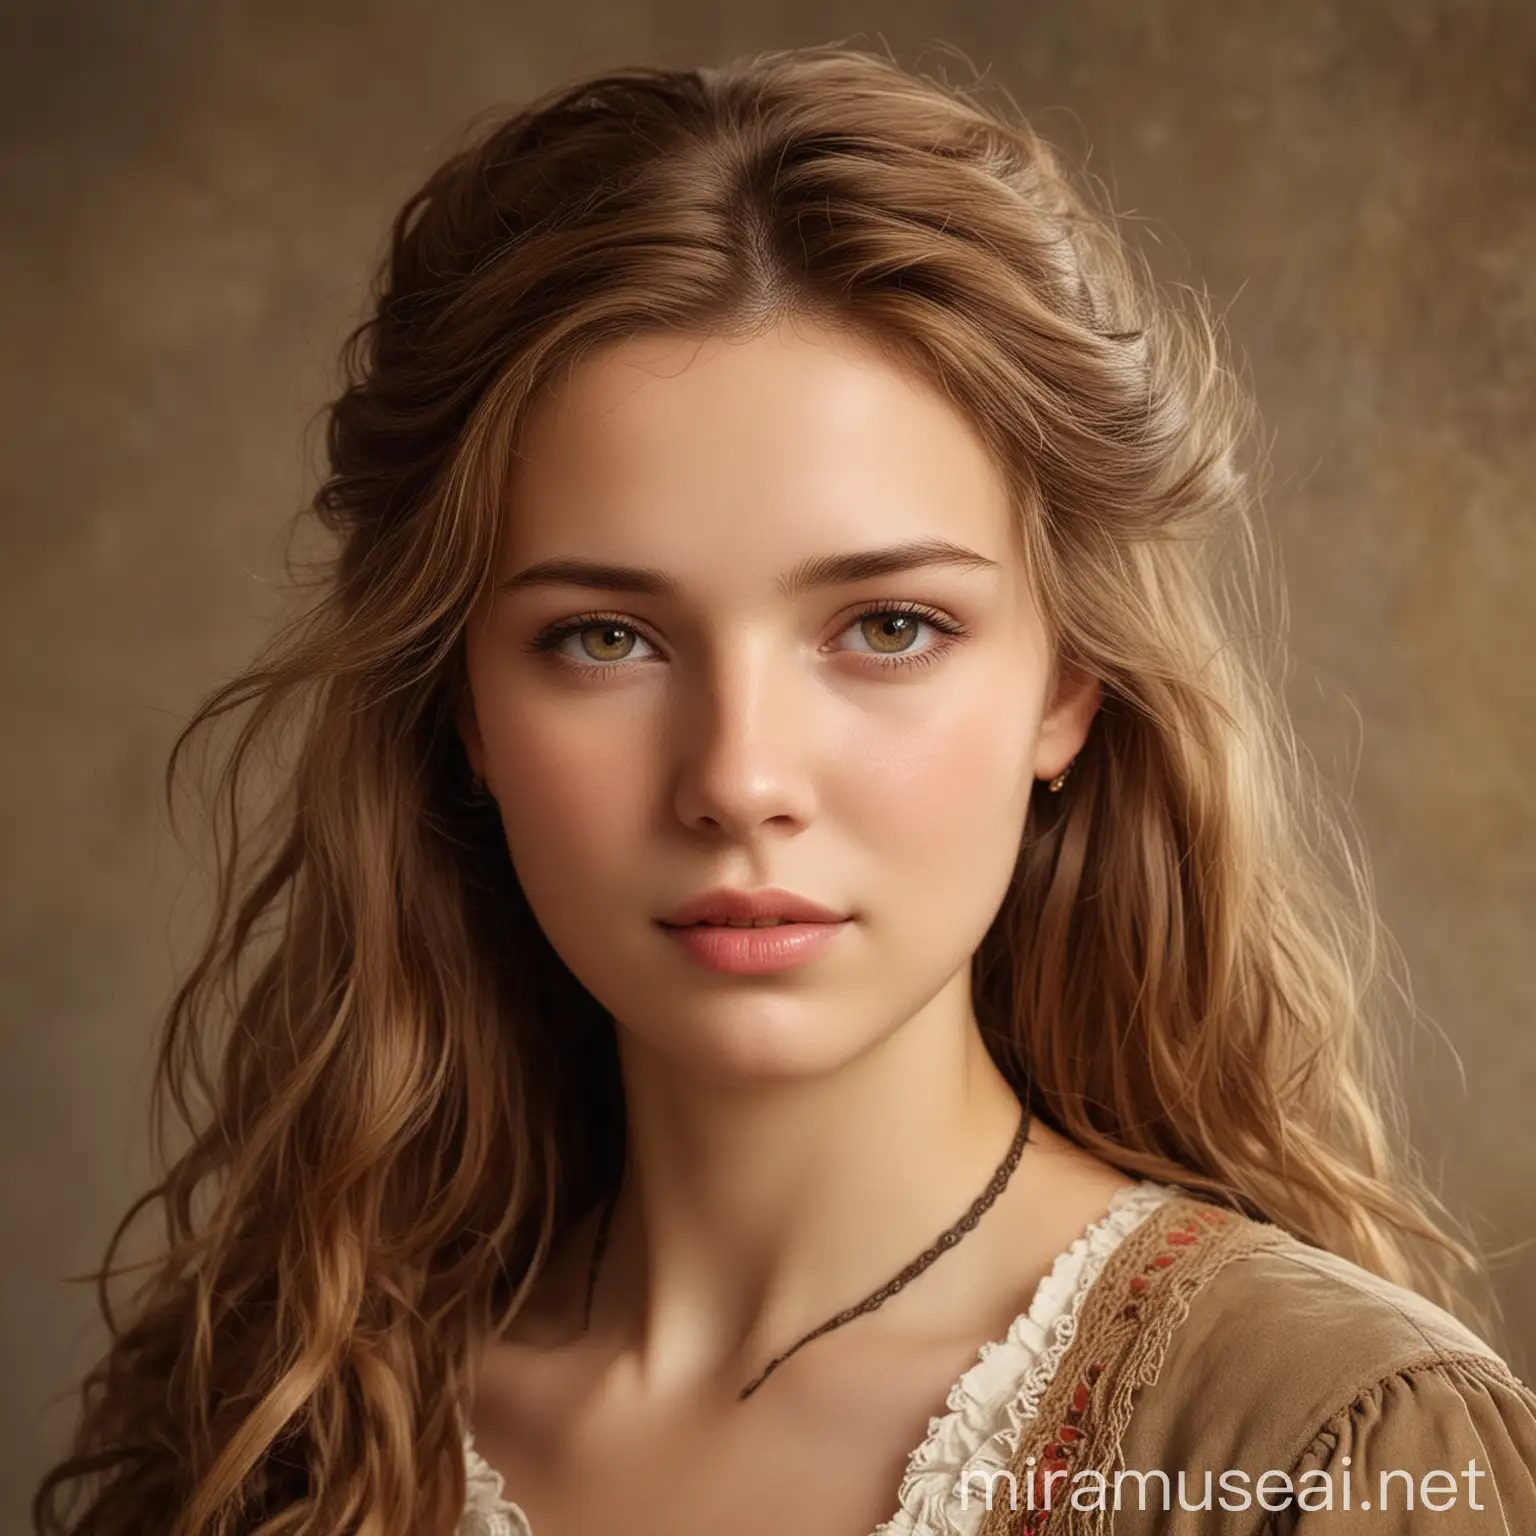 light brown haired women from western time period